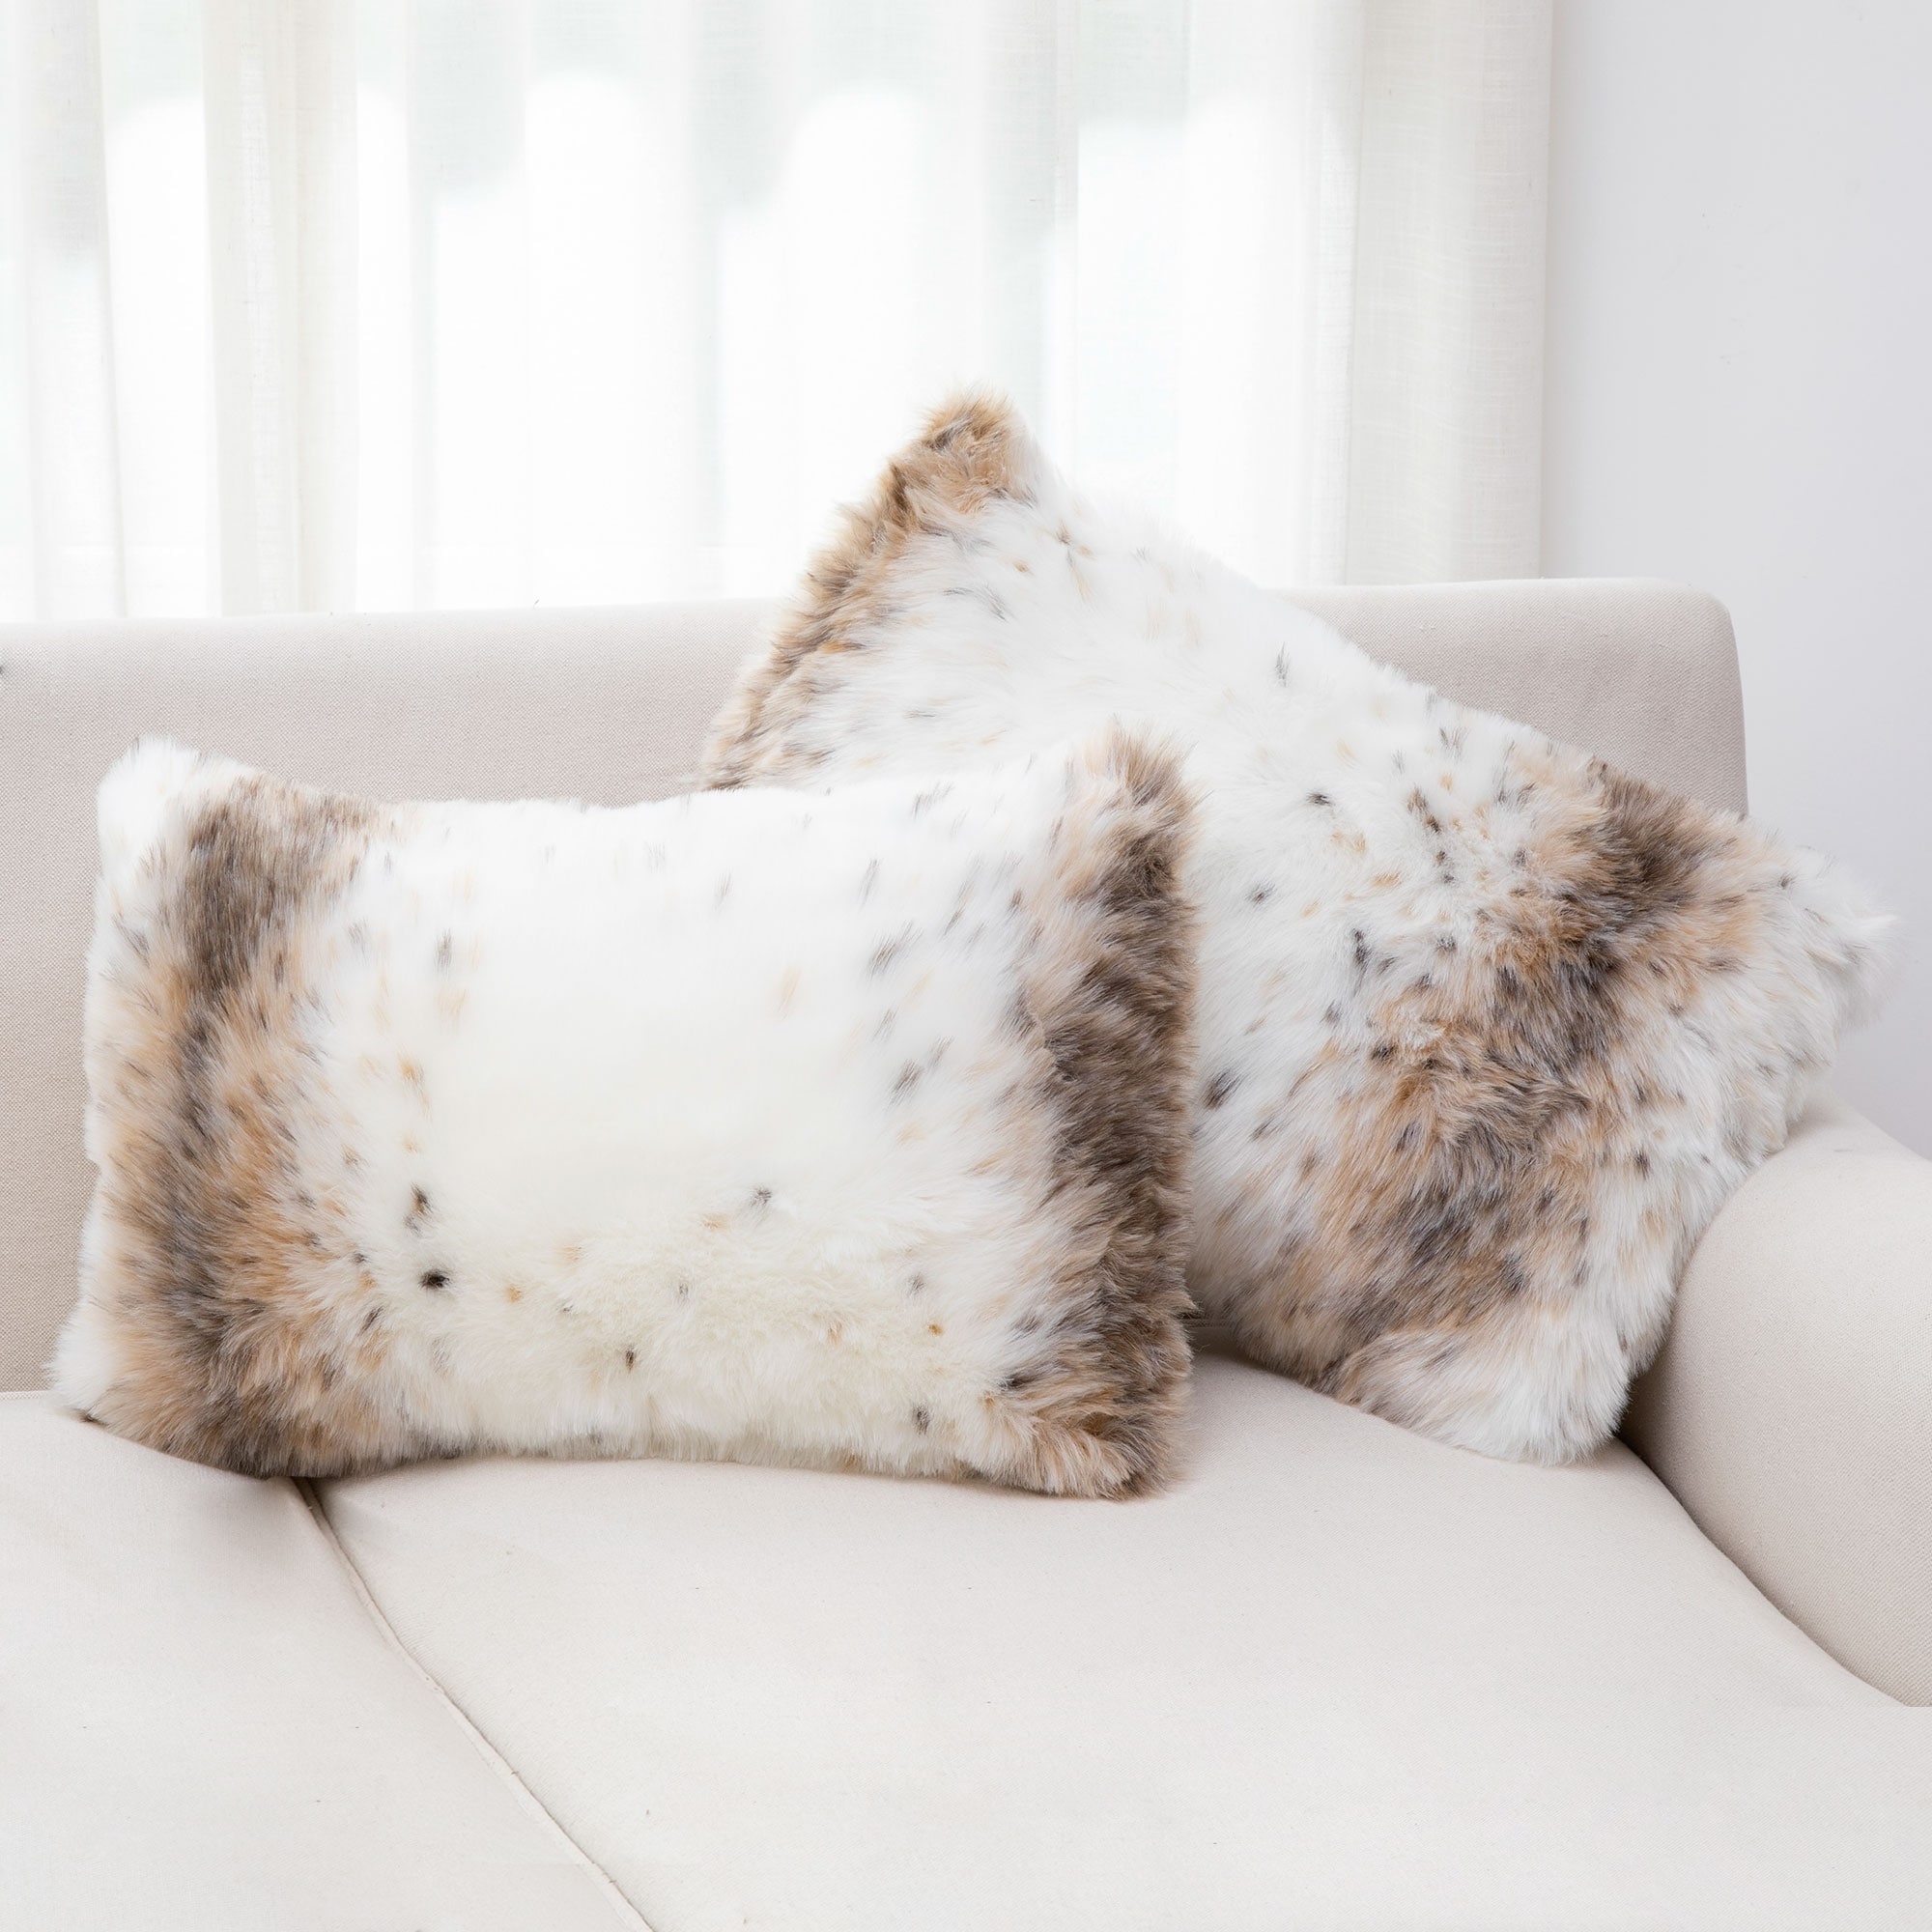 https://ak1.ostkcdn.com/images/products/is/images/direct/aa38e493265bf95e0bab8d8a5bc910de436f324e/Cheer-Collection-Set-of-2-Animal-Fur-Throw-Pillows.jpg